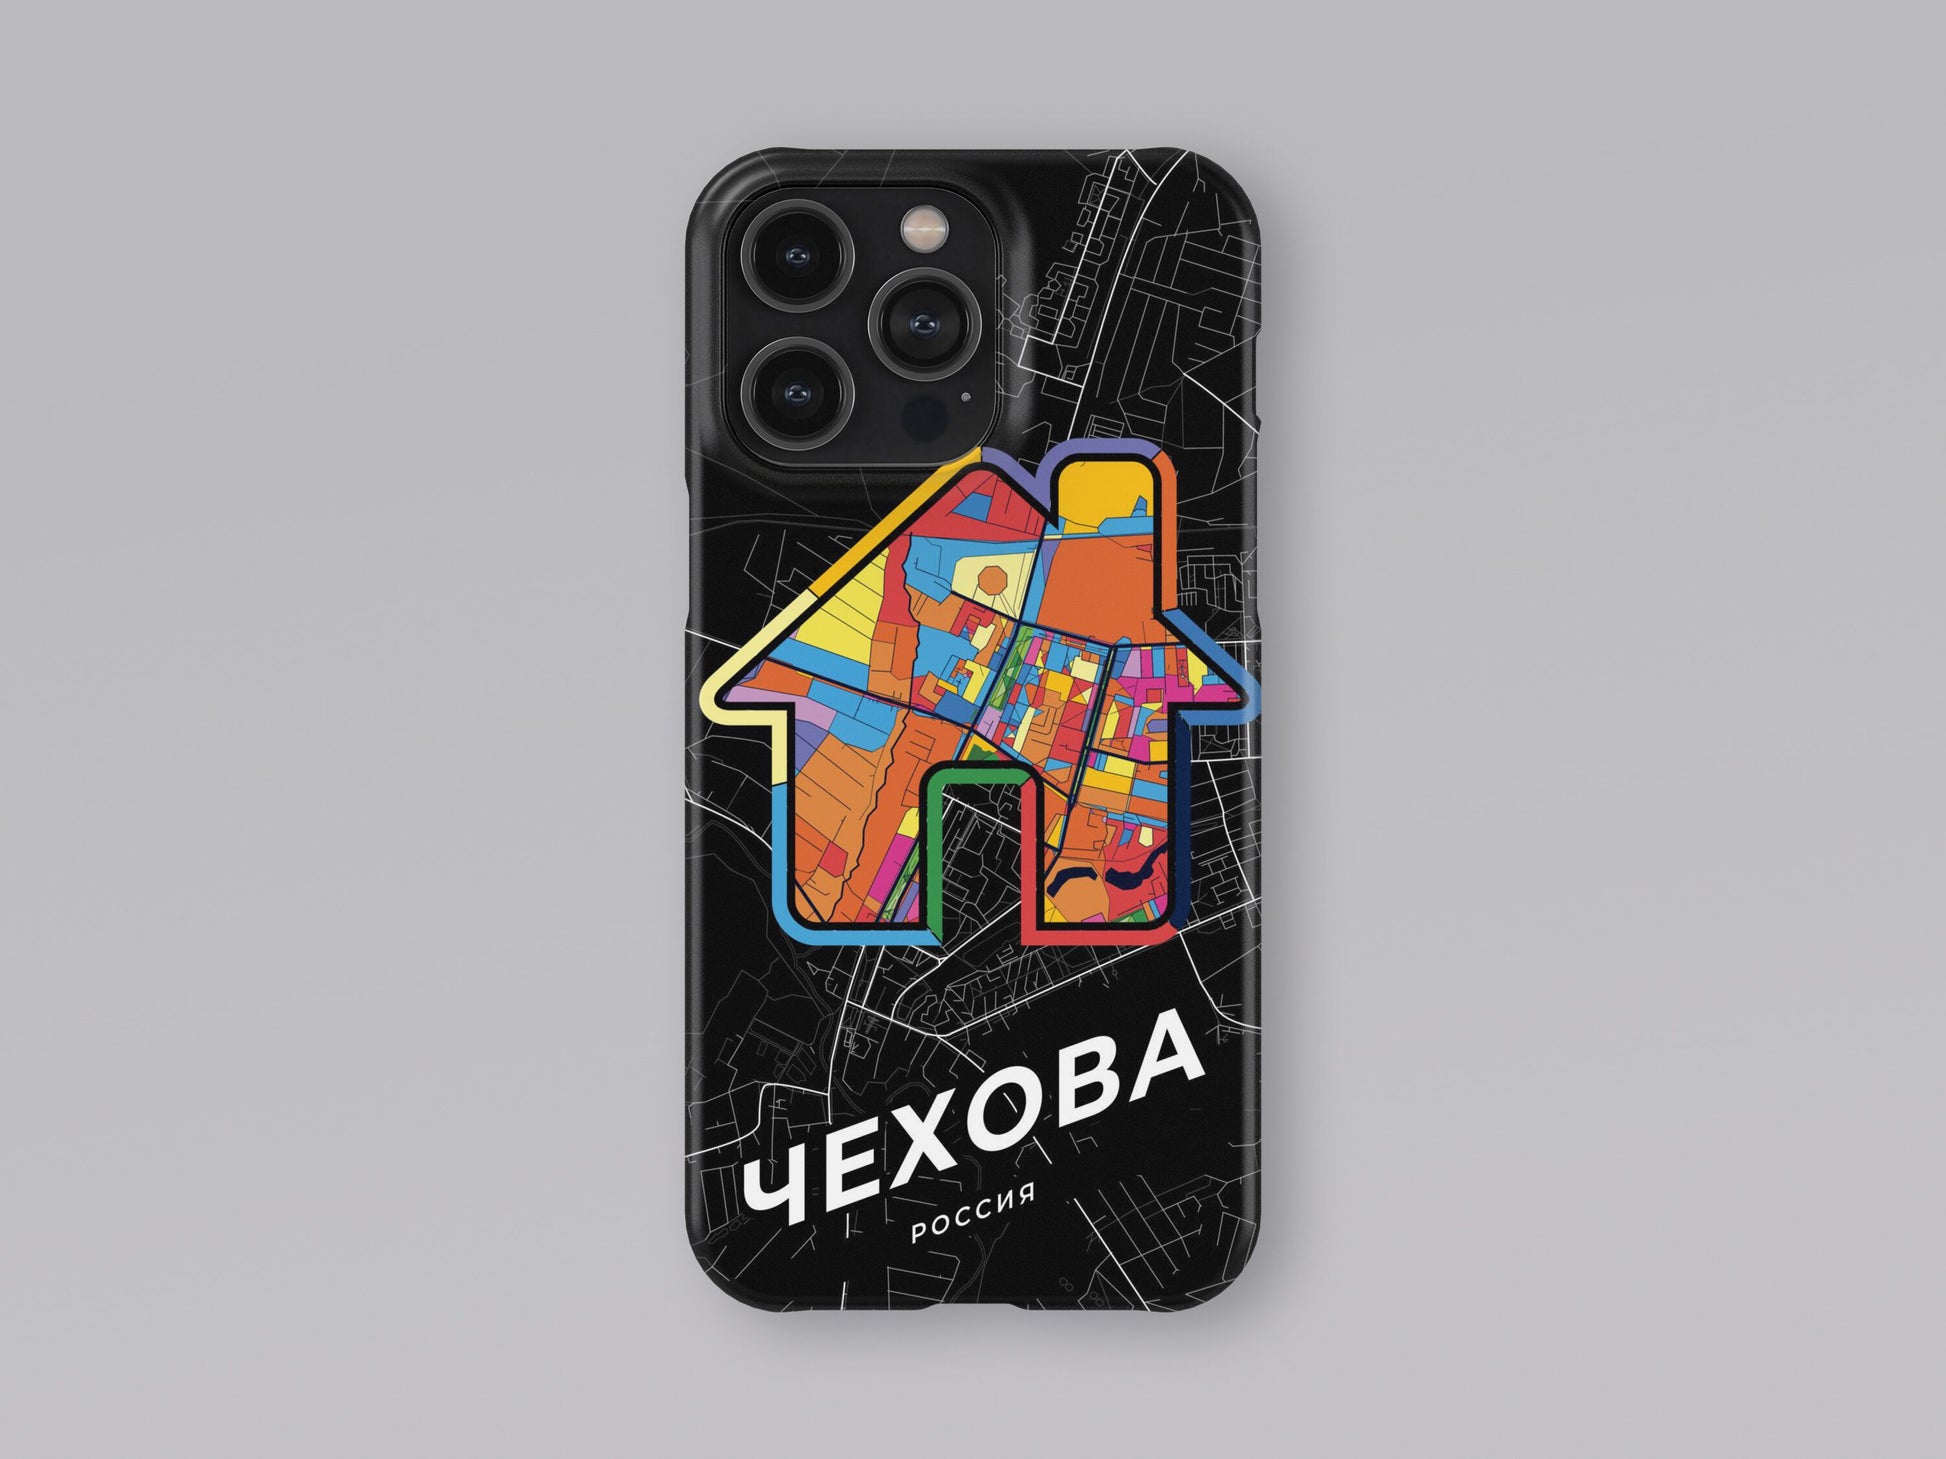 Chekhov Russia slim phone case with colorful icon. Birthday, wedding or housewarming gift. Couple match cases. 3